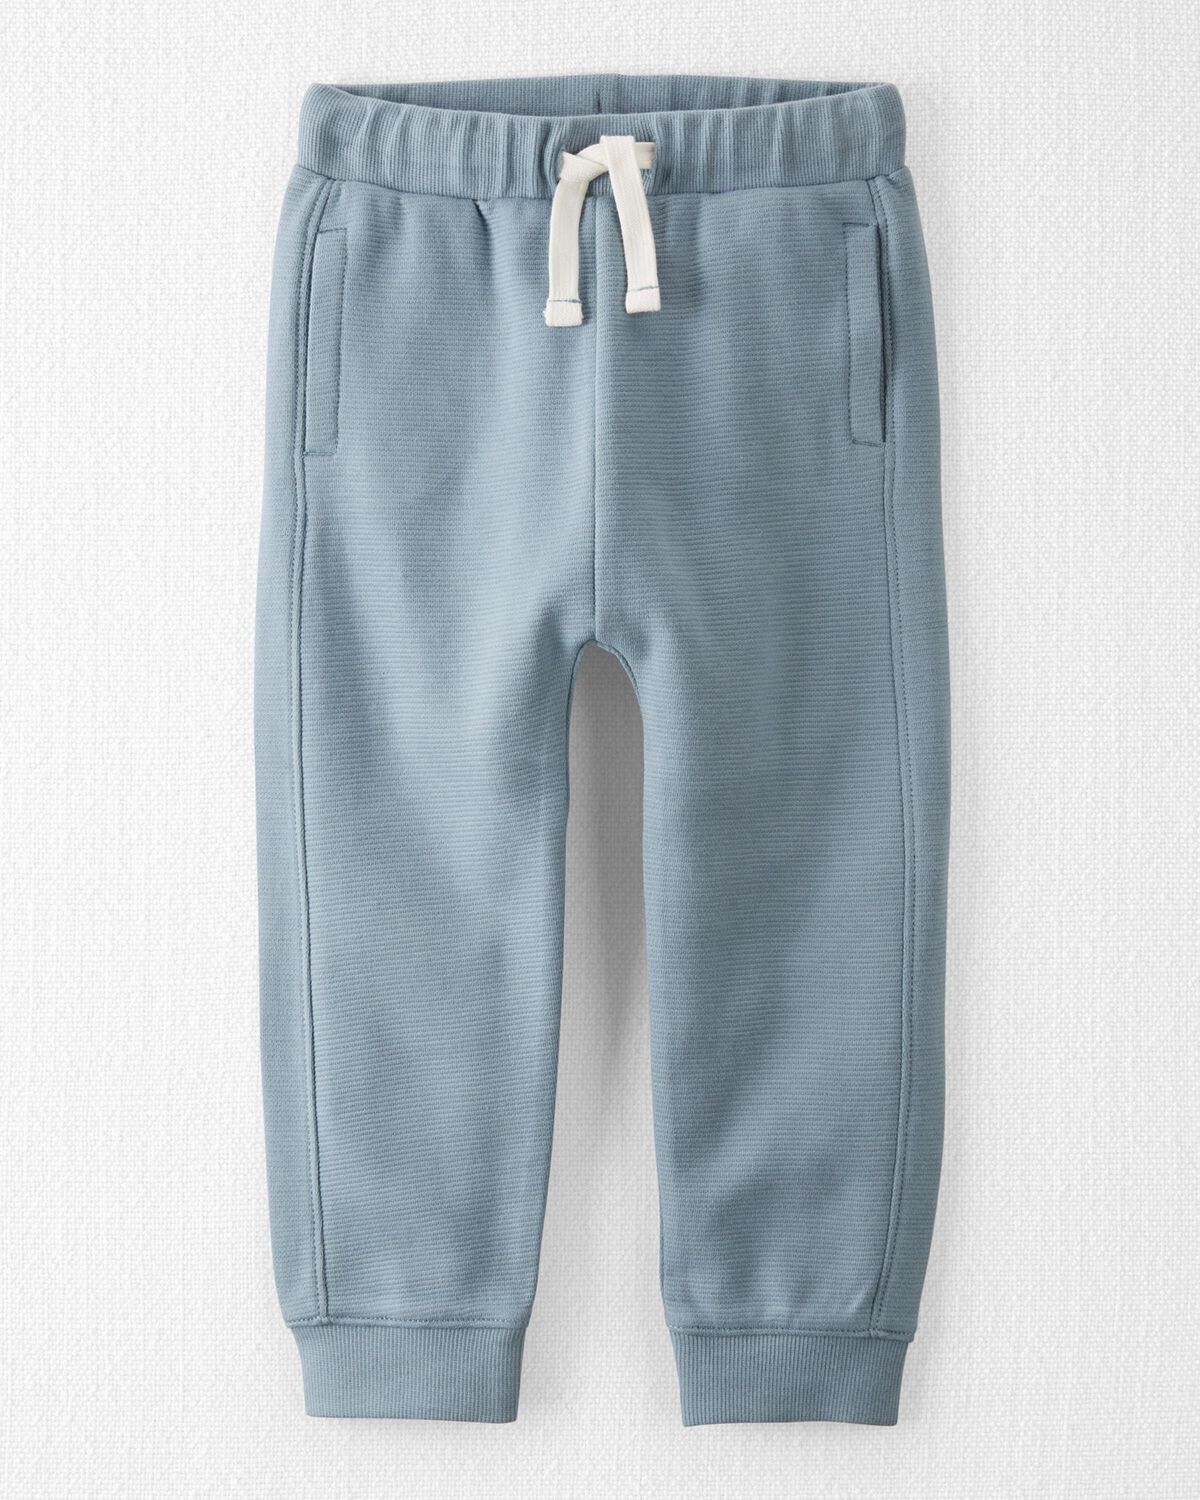 Cloudy Day Toddler Organic Cotton Ribbed Pull-On Pants | carters.com